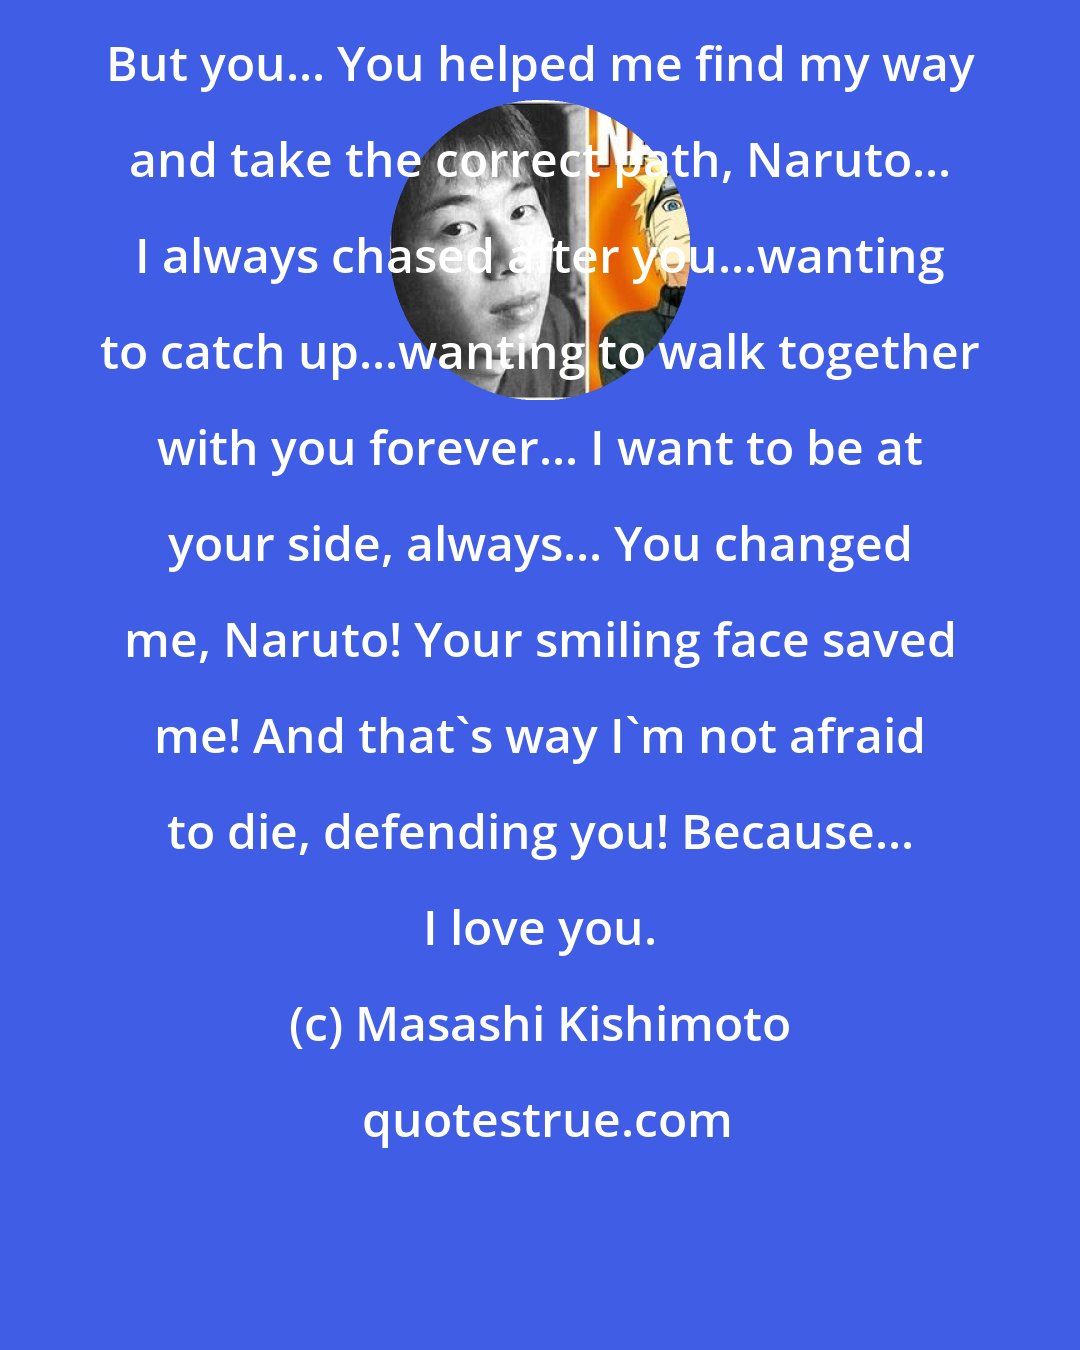 Masashi Kishimoto: But you... You helped me find my way and take the correct path, Naruto... I always chased after you...wanting to catch up...wanting to walk together with you forever... I want to be at your side, always... You changed me, Naruto! Your smiling face saved me! And that's way I'm not afraid to die, defending you! Because... I love you.